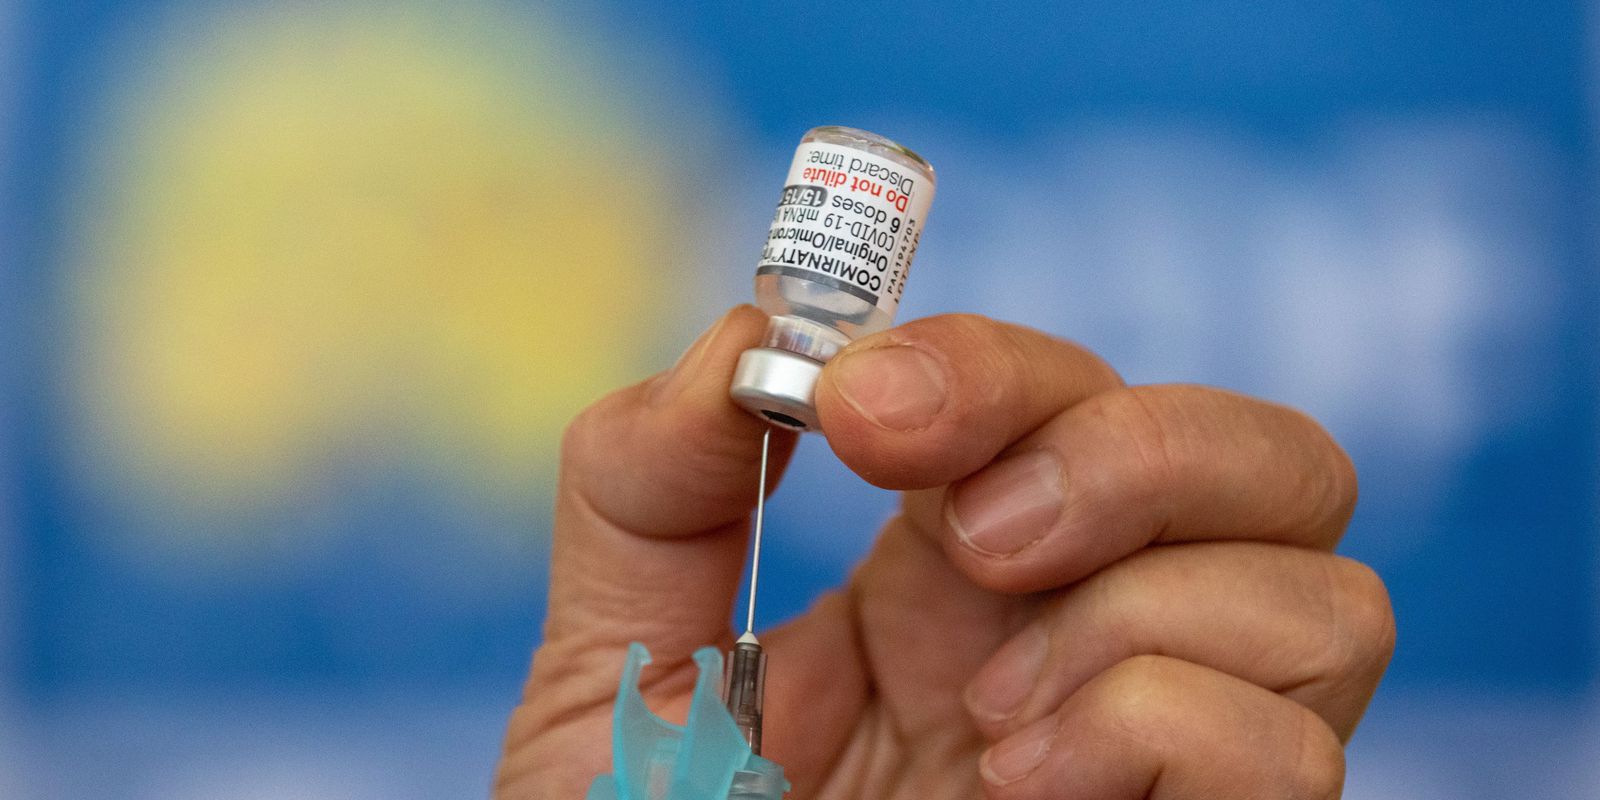 Bivalent vaccination against covid-19 exceeds 9 million doses